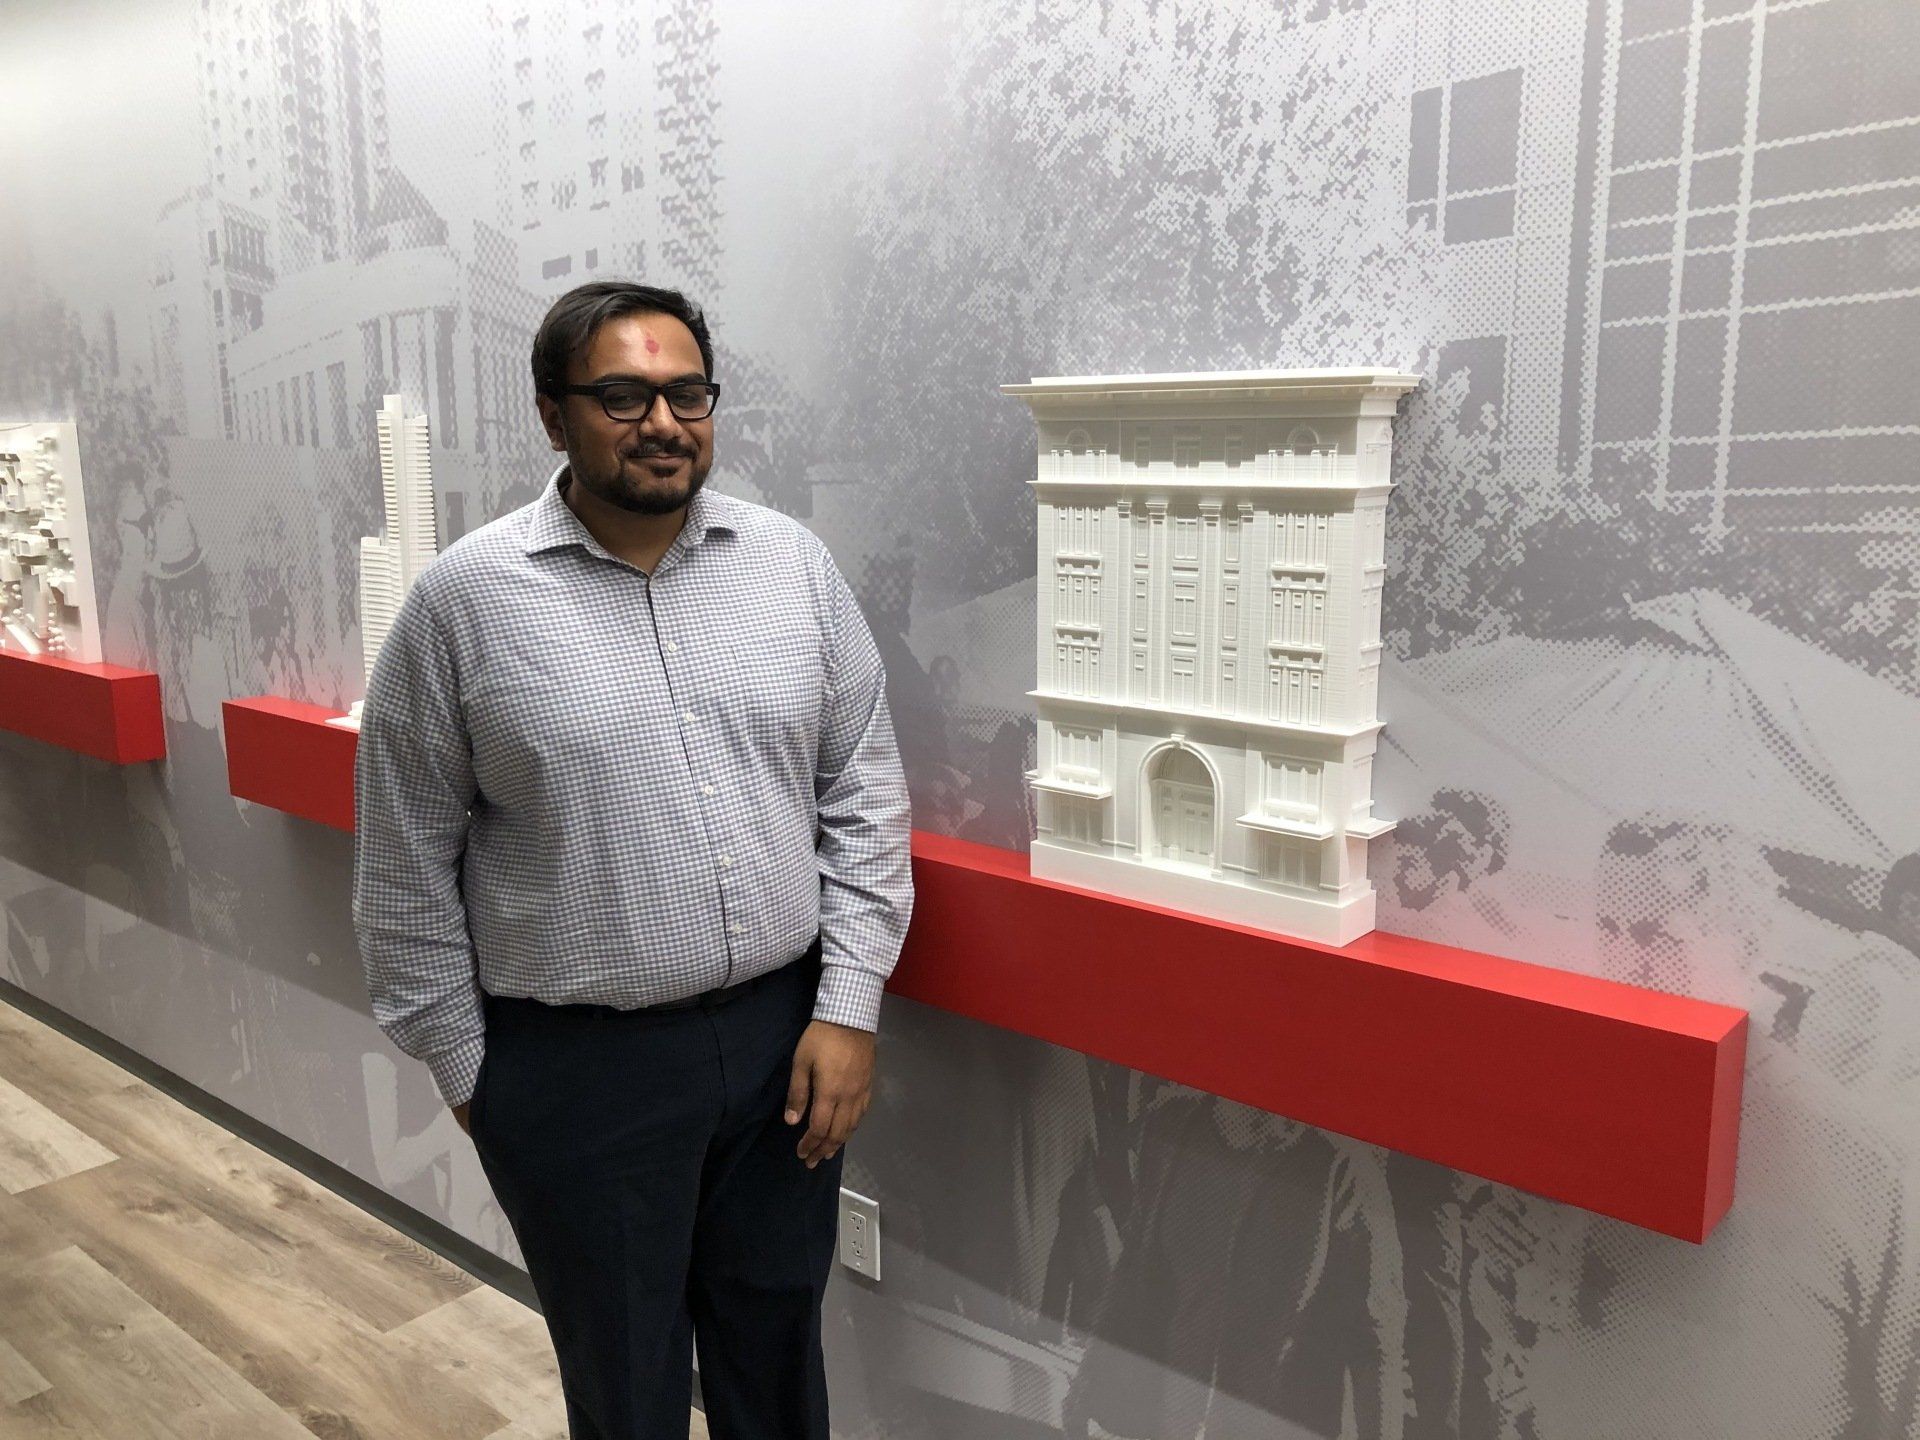 3d printed parts of Vegas Convention Center